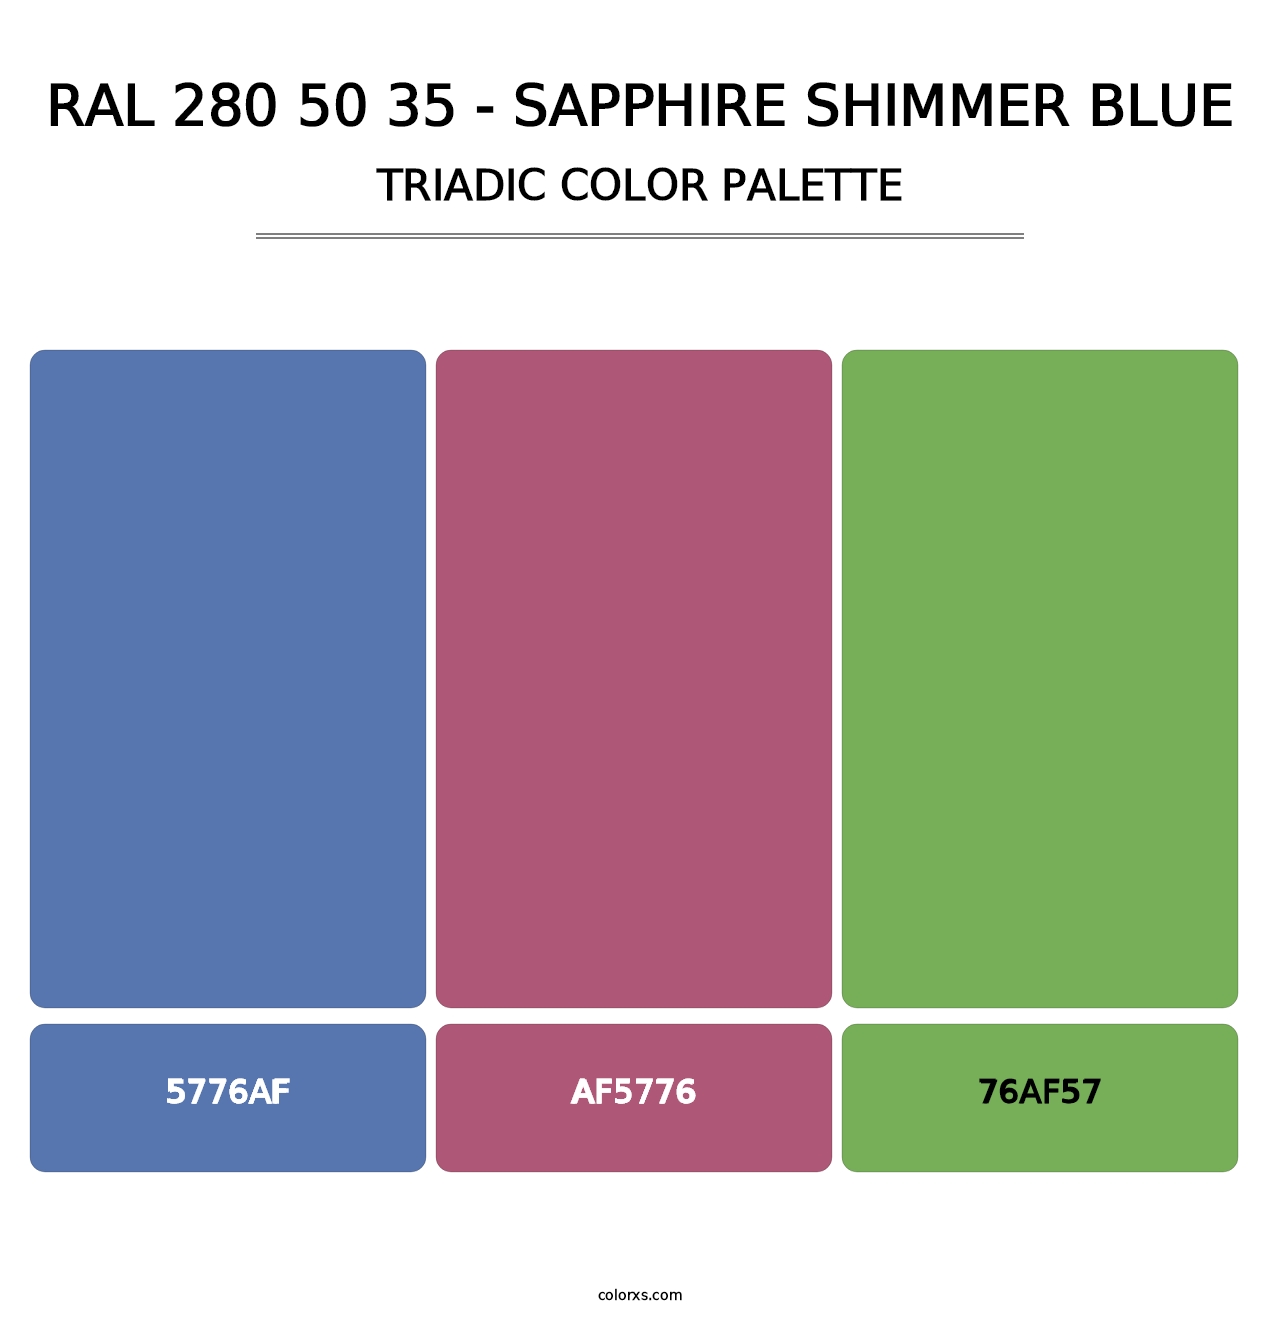 RAL 280 50 35 - Sapphire Shimmer Blue - Triadic Color Palette